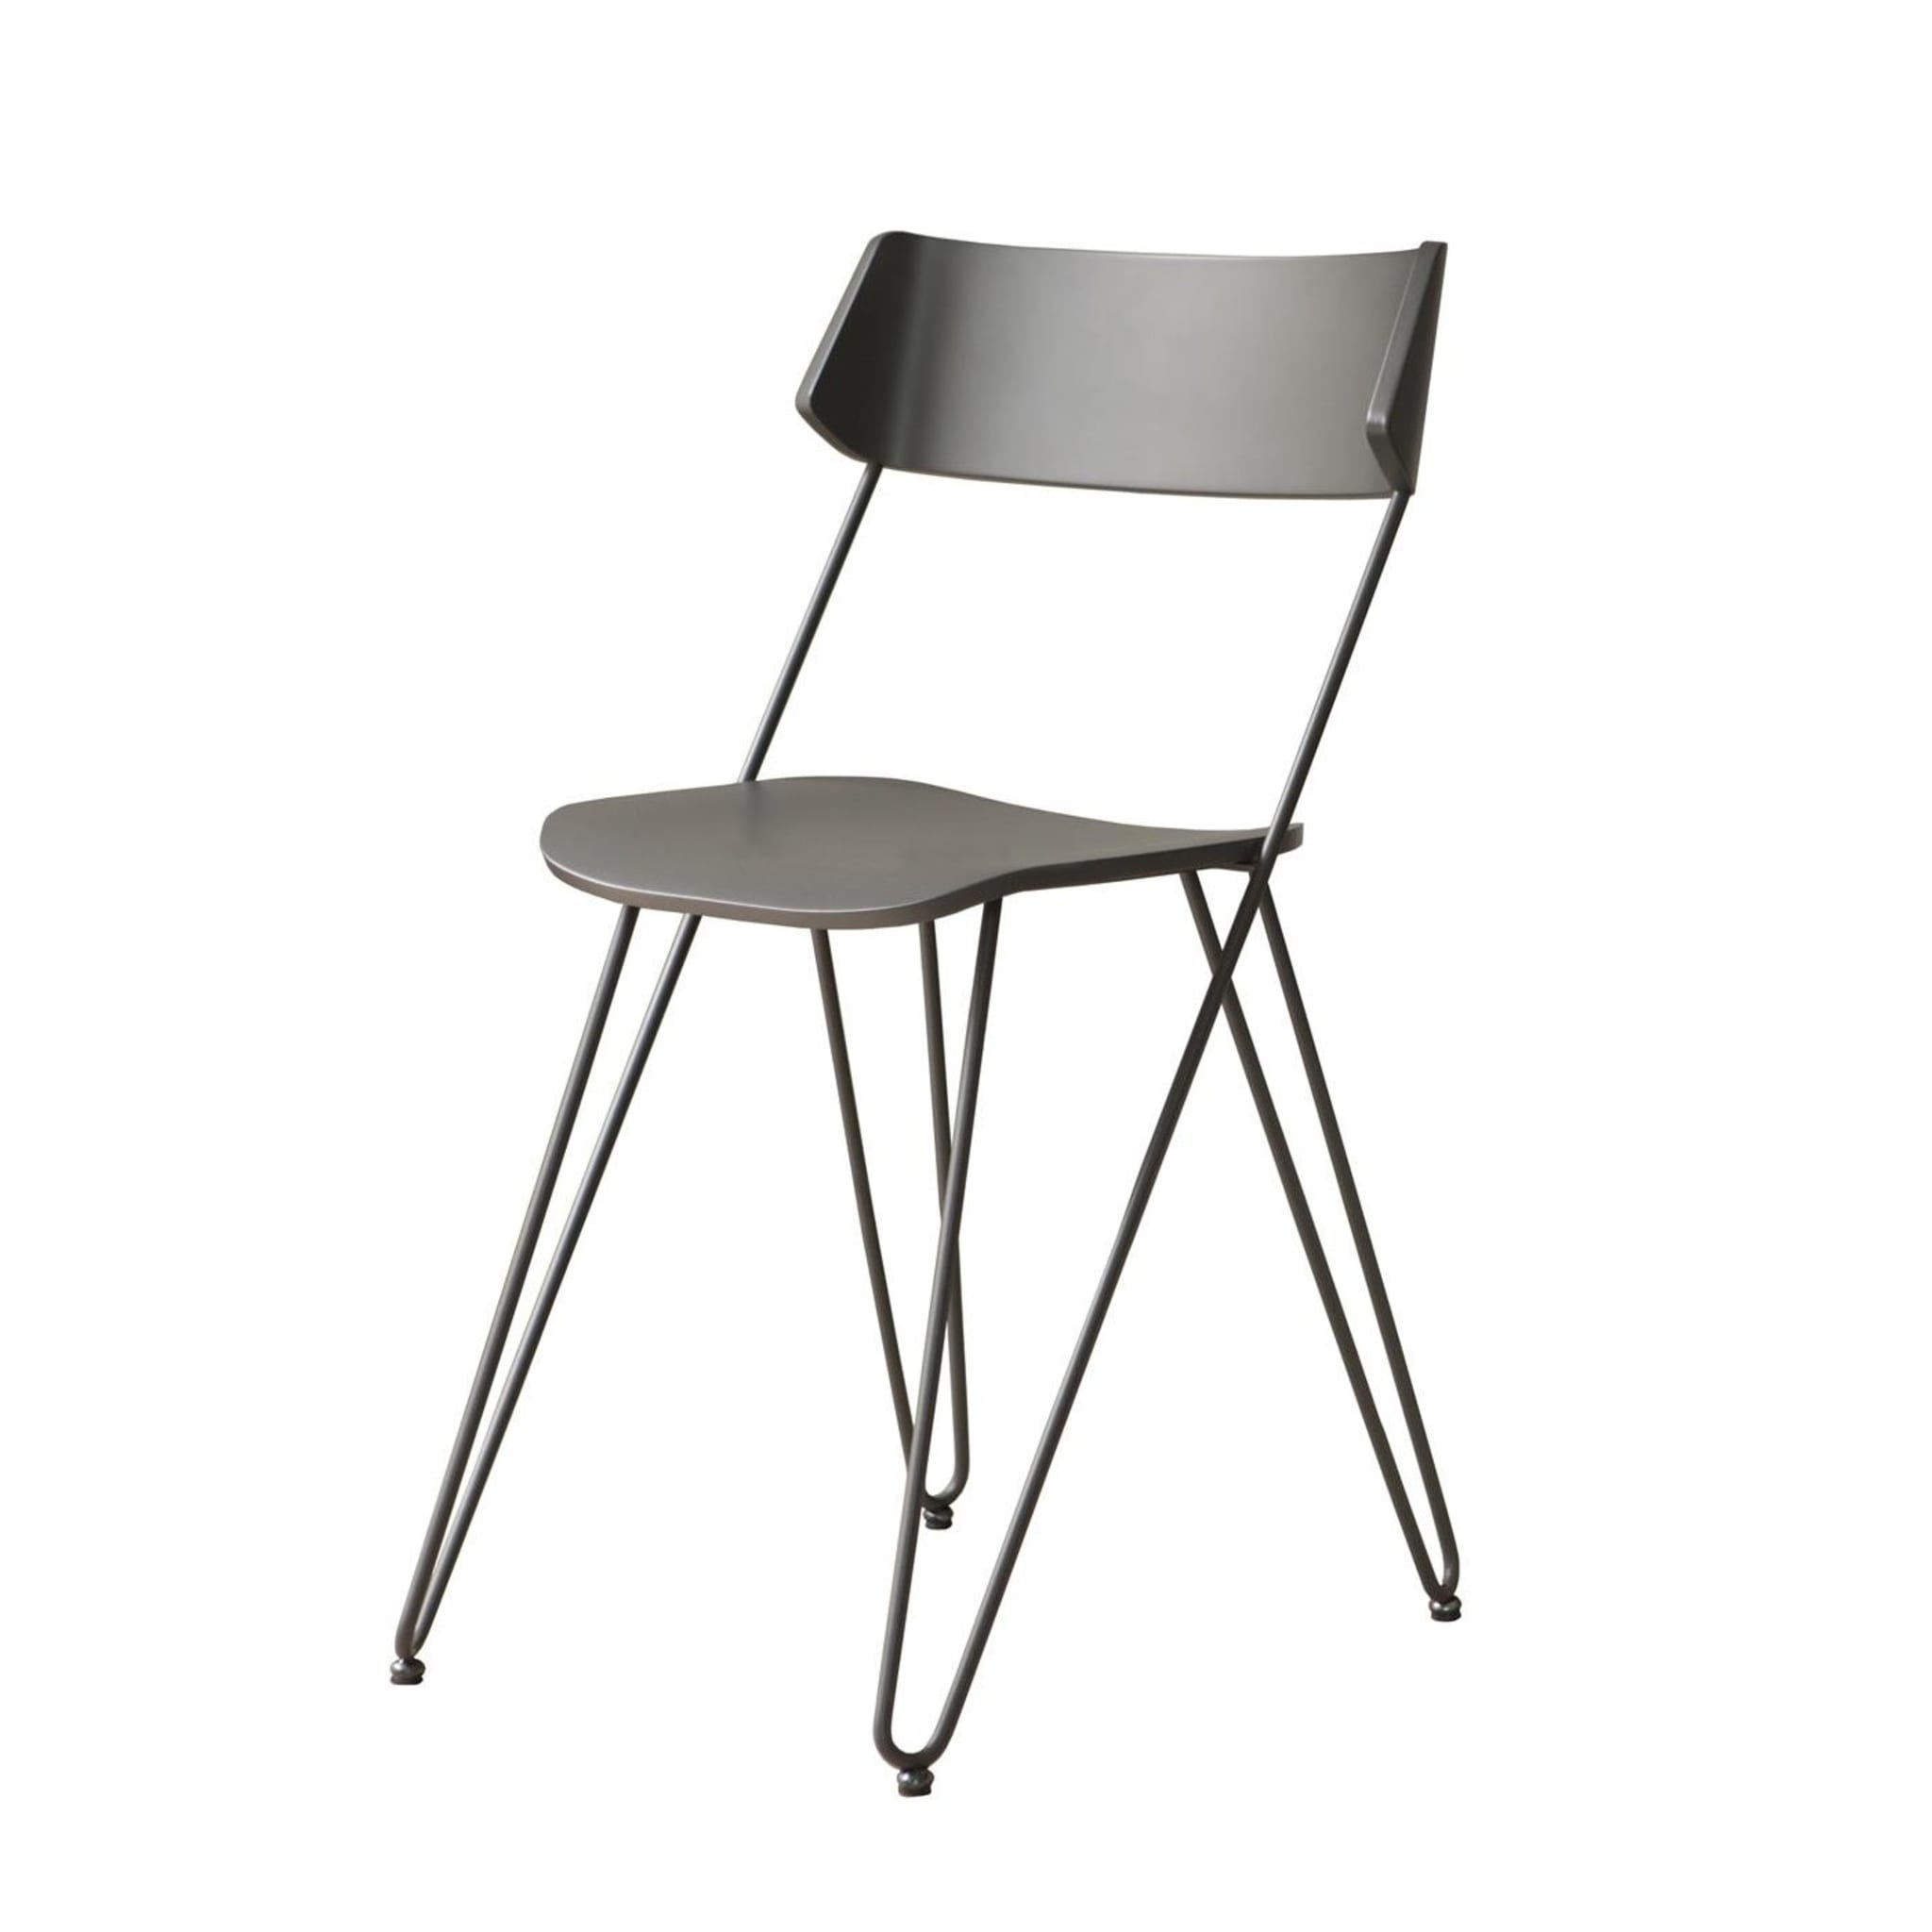 Ibsen One Gray Chair - Alternative view 1